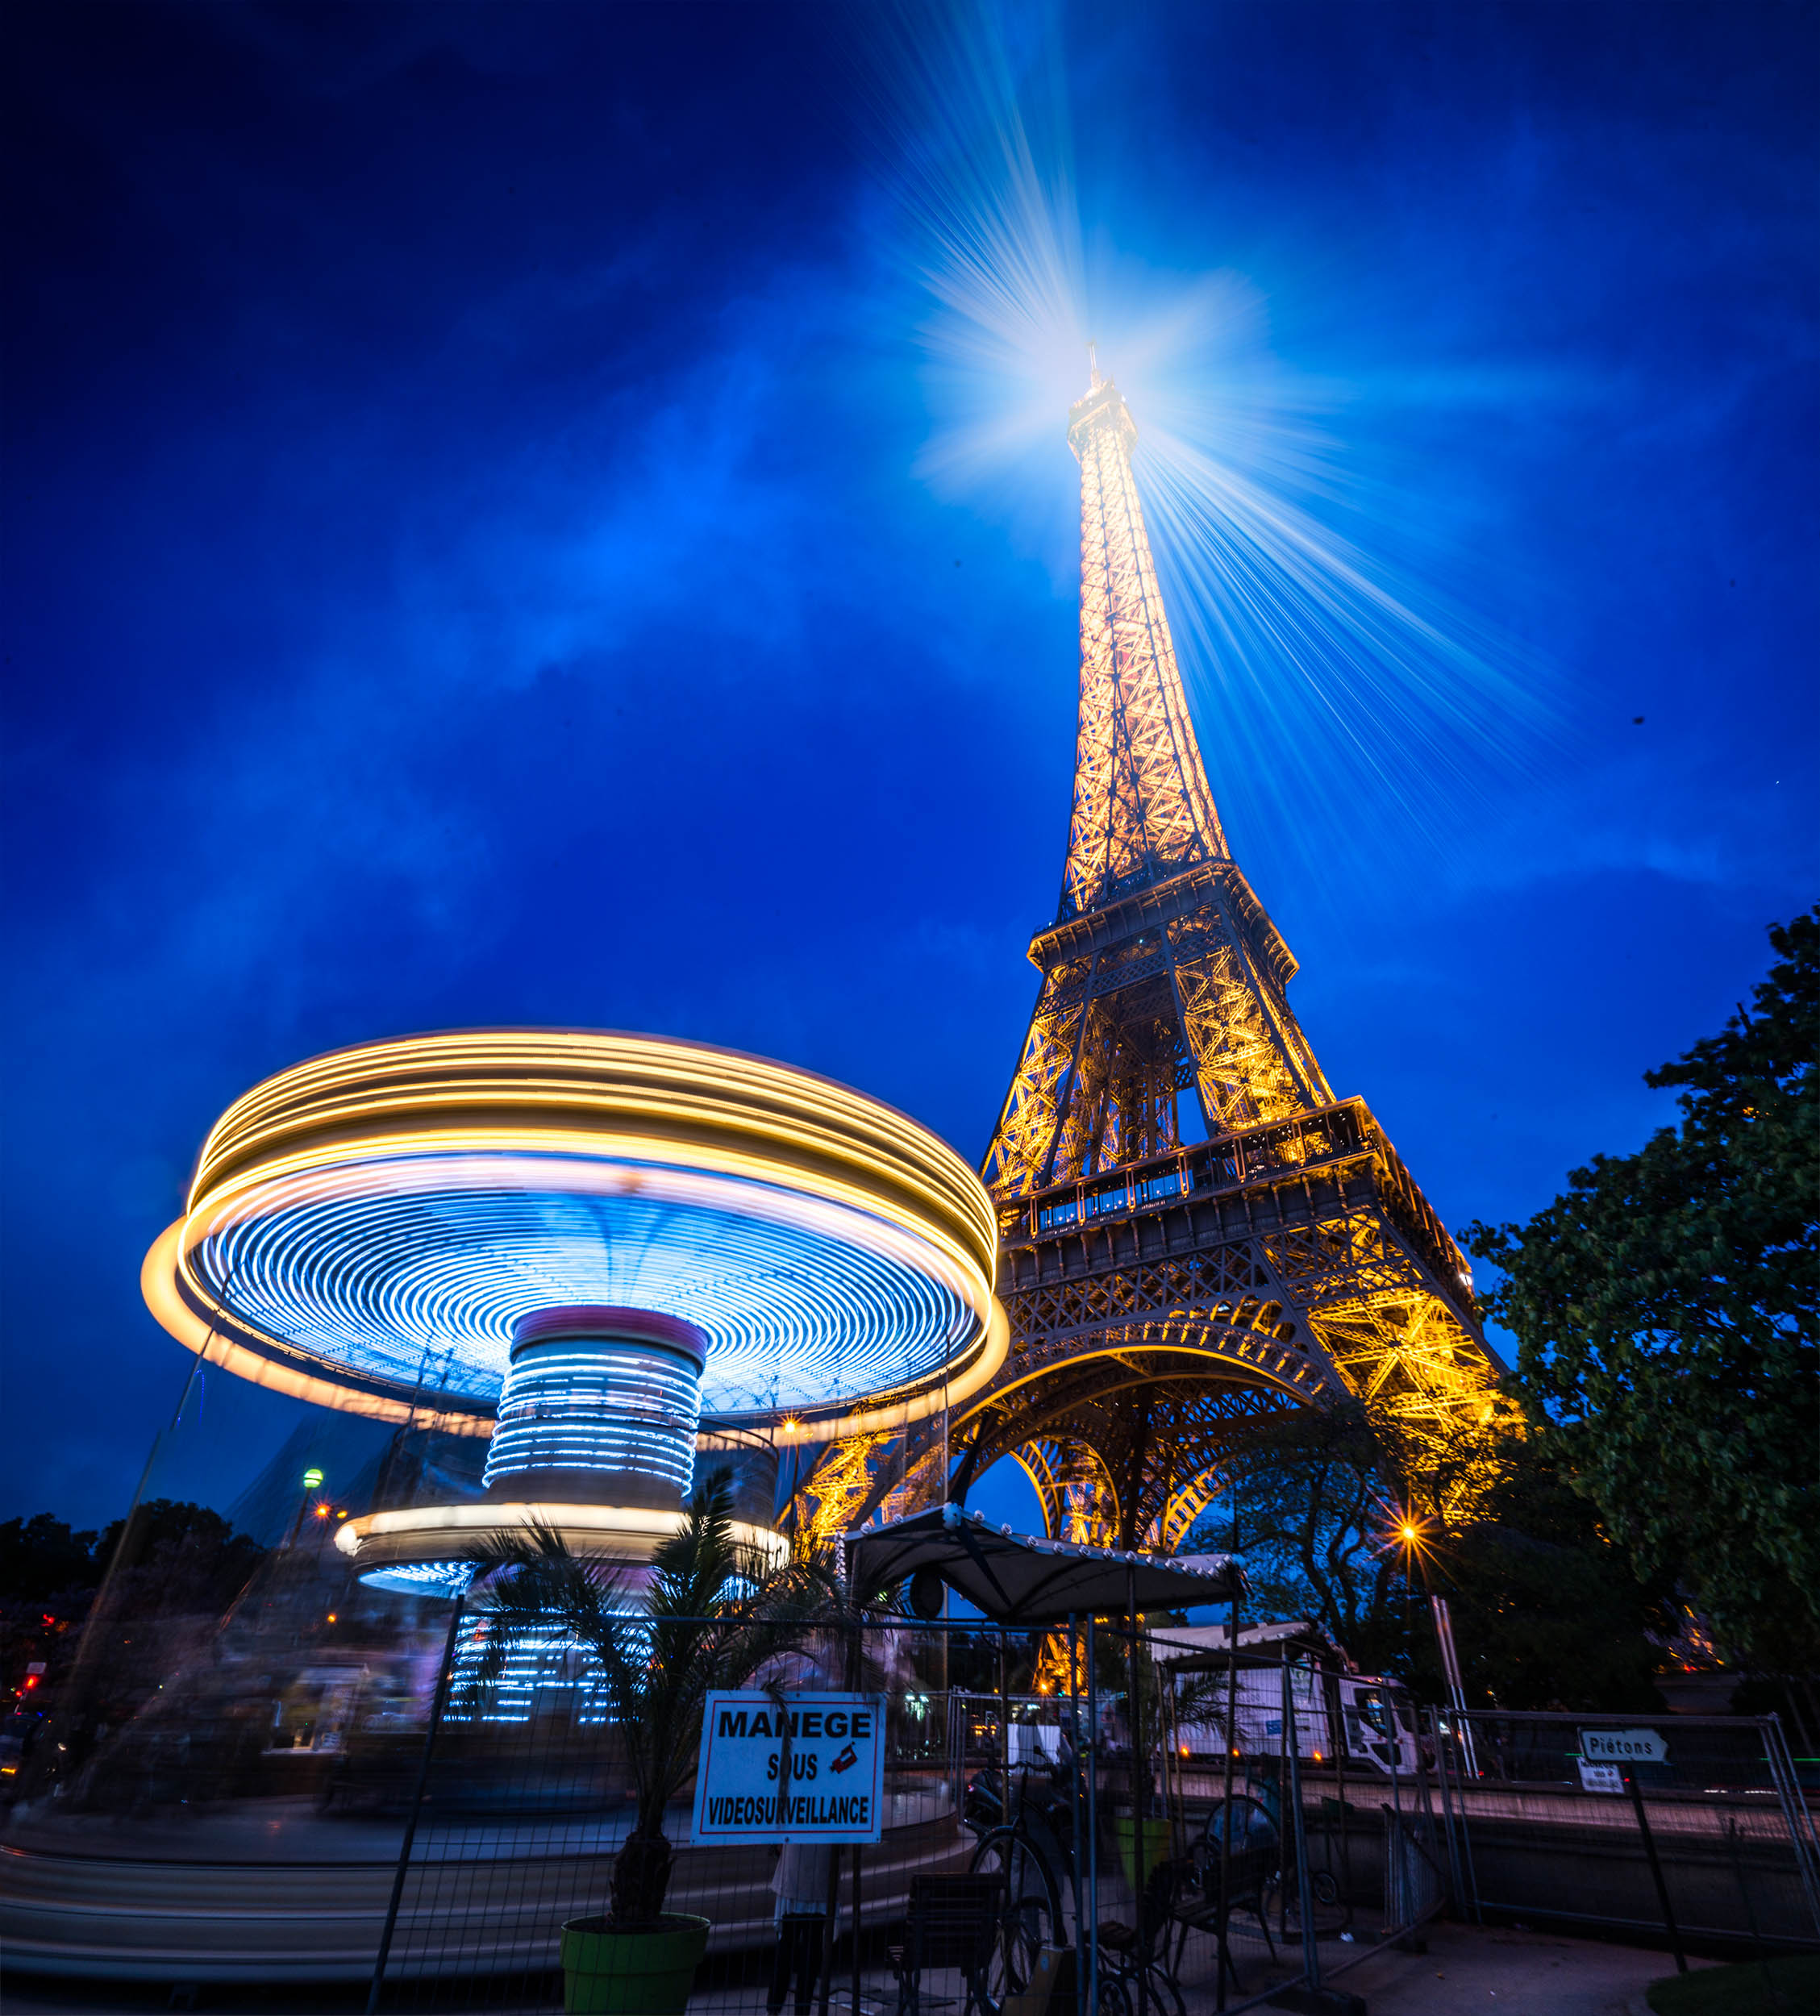 Blog | The carousel of the Eiffel Tower